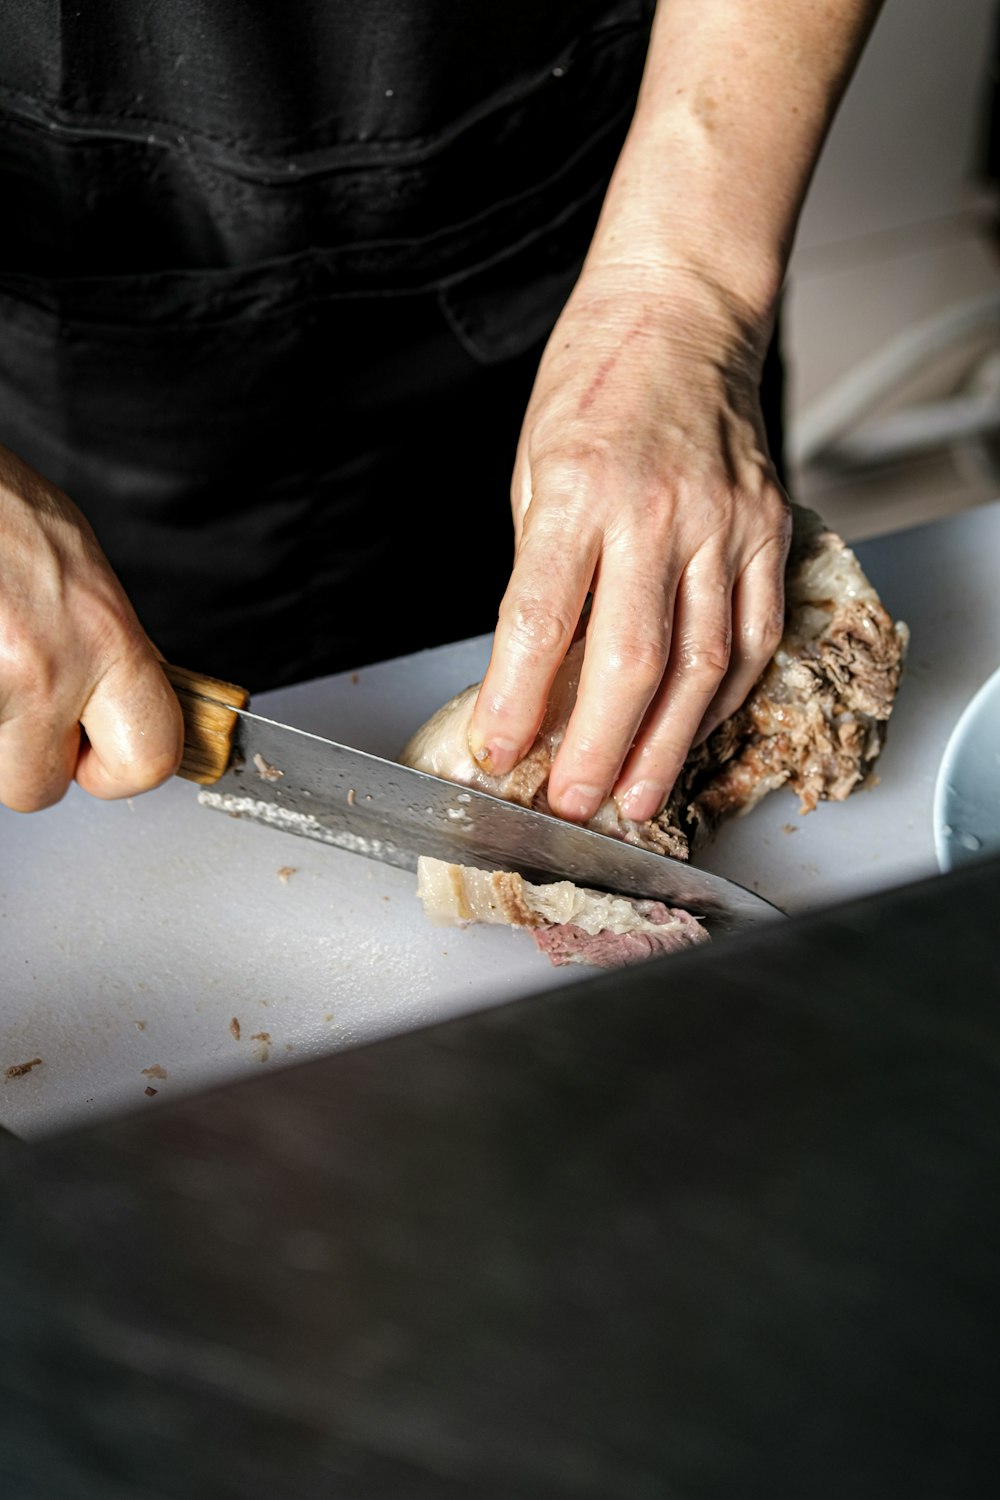 a person cutting meat with a knife on a cutting board